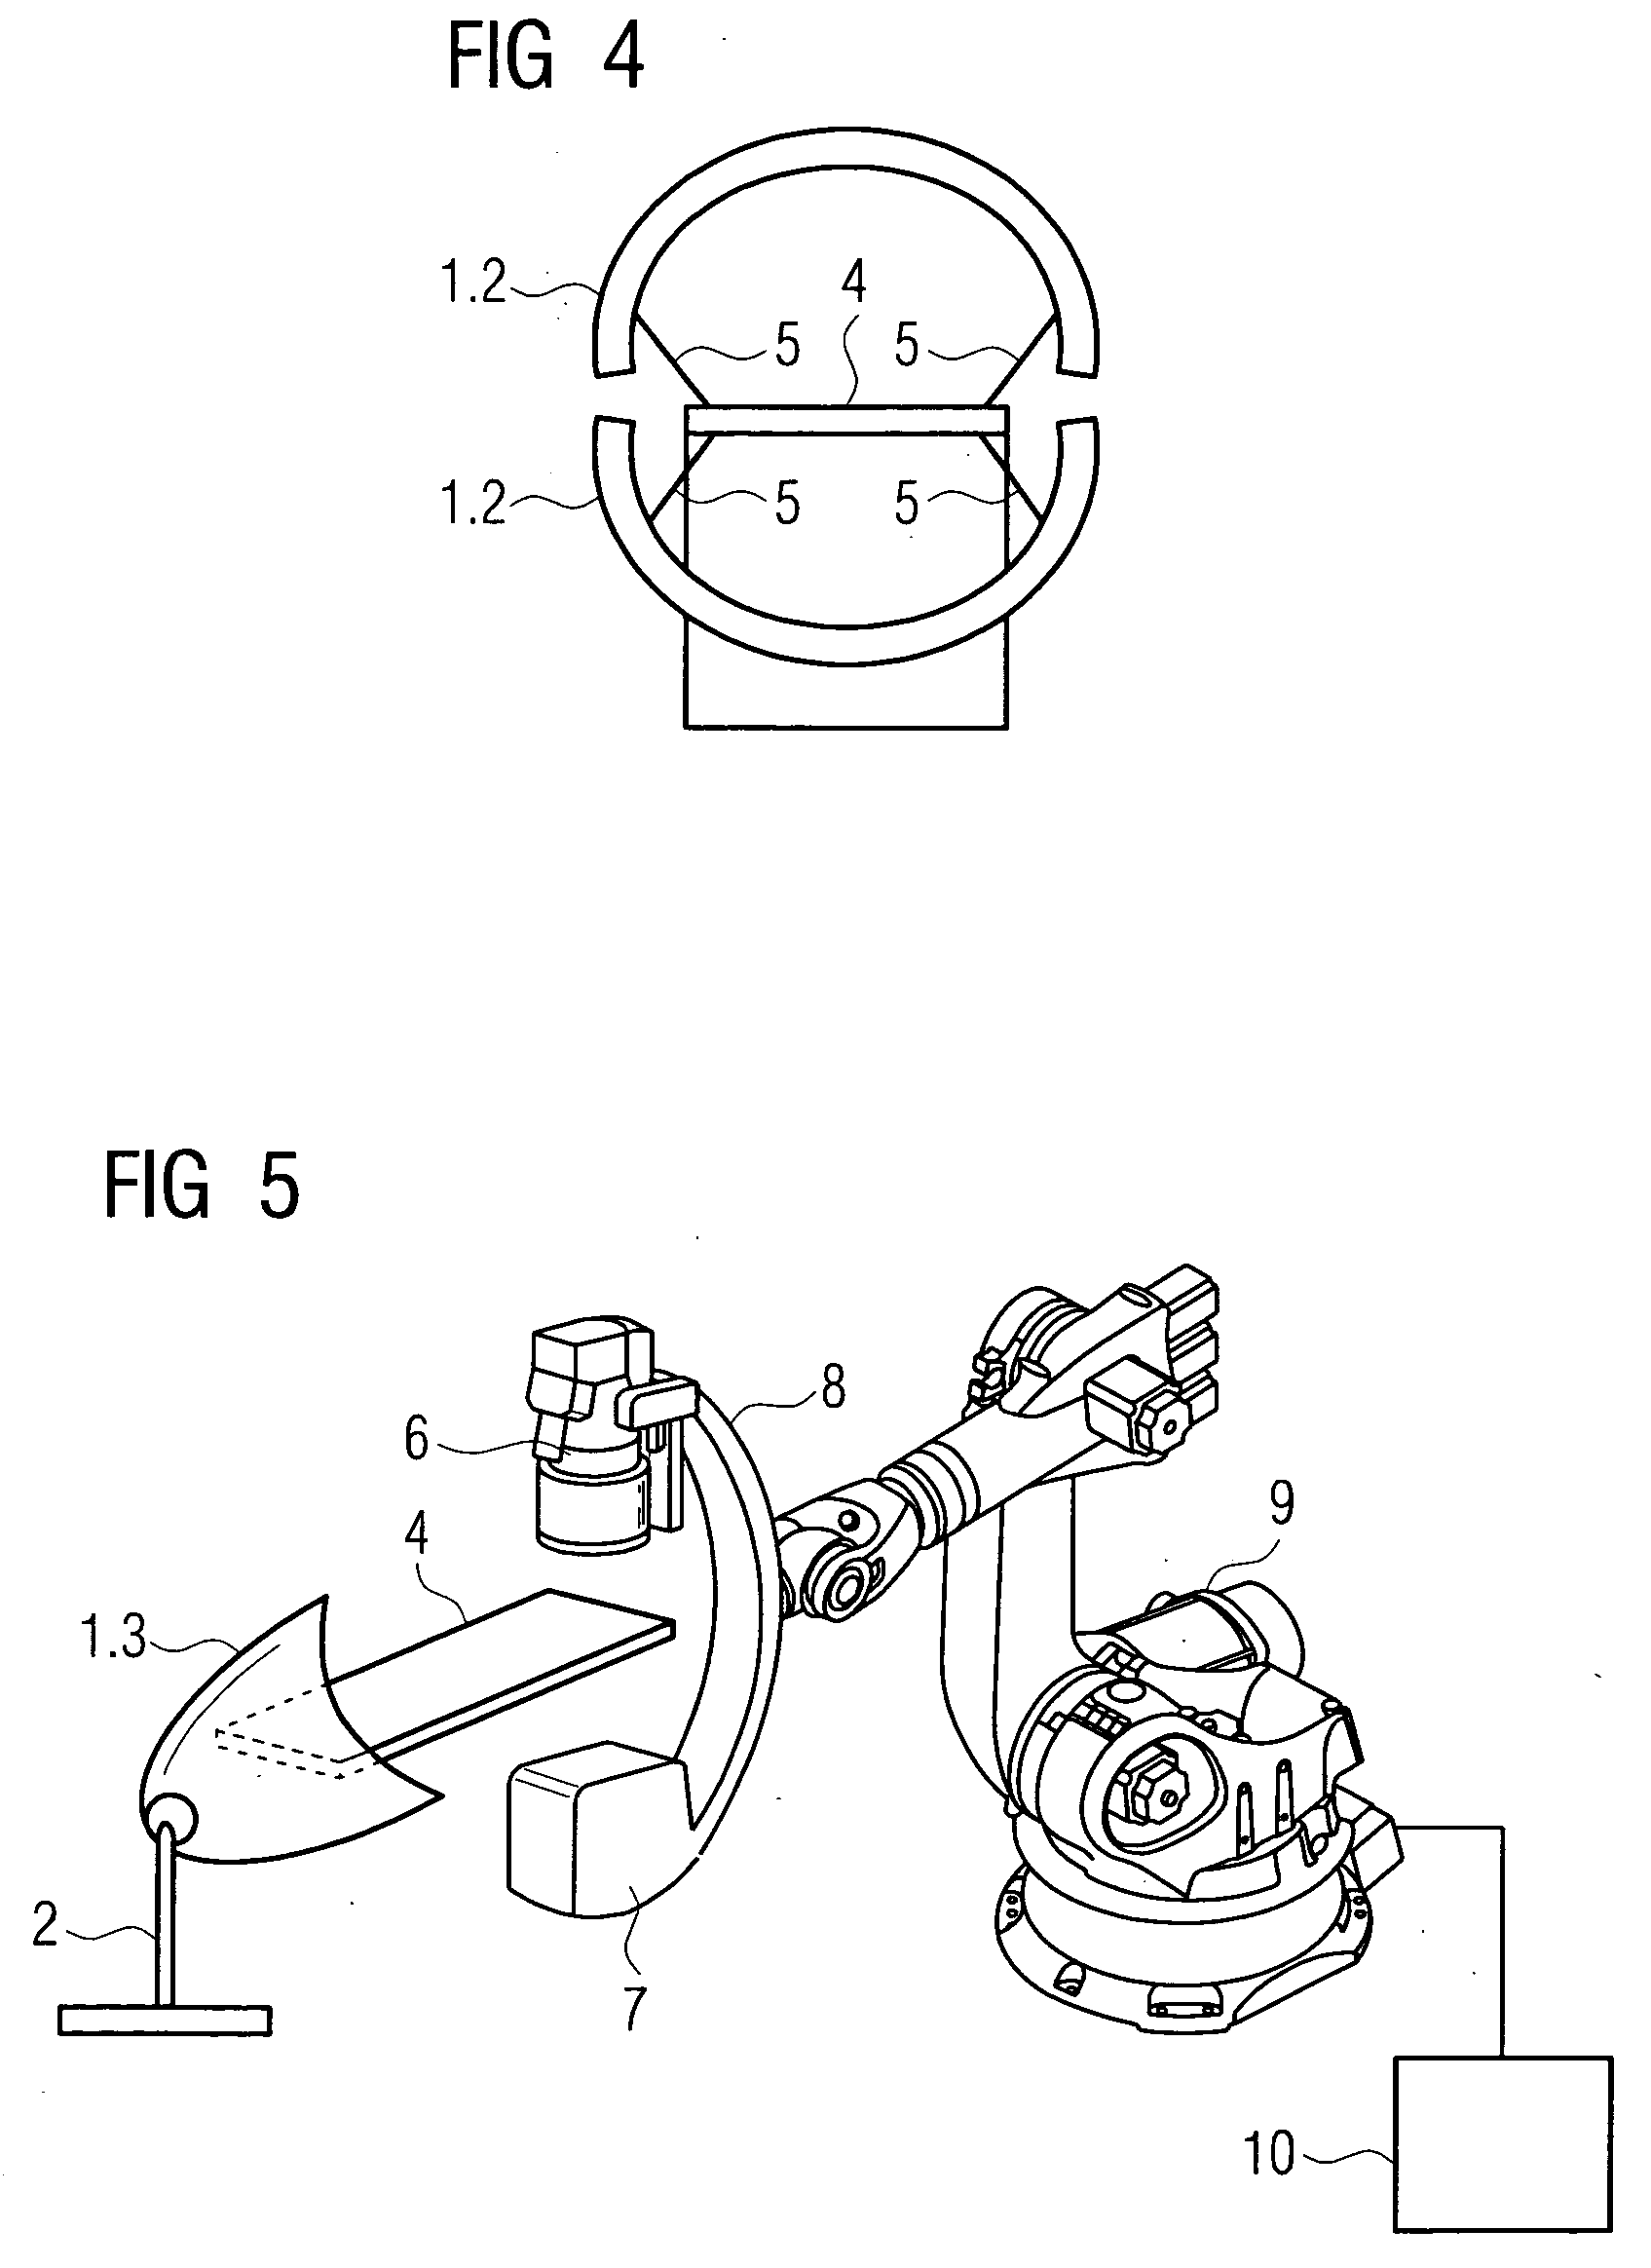 Collision protection device for a patient examination table of a medical x-ray device